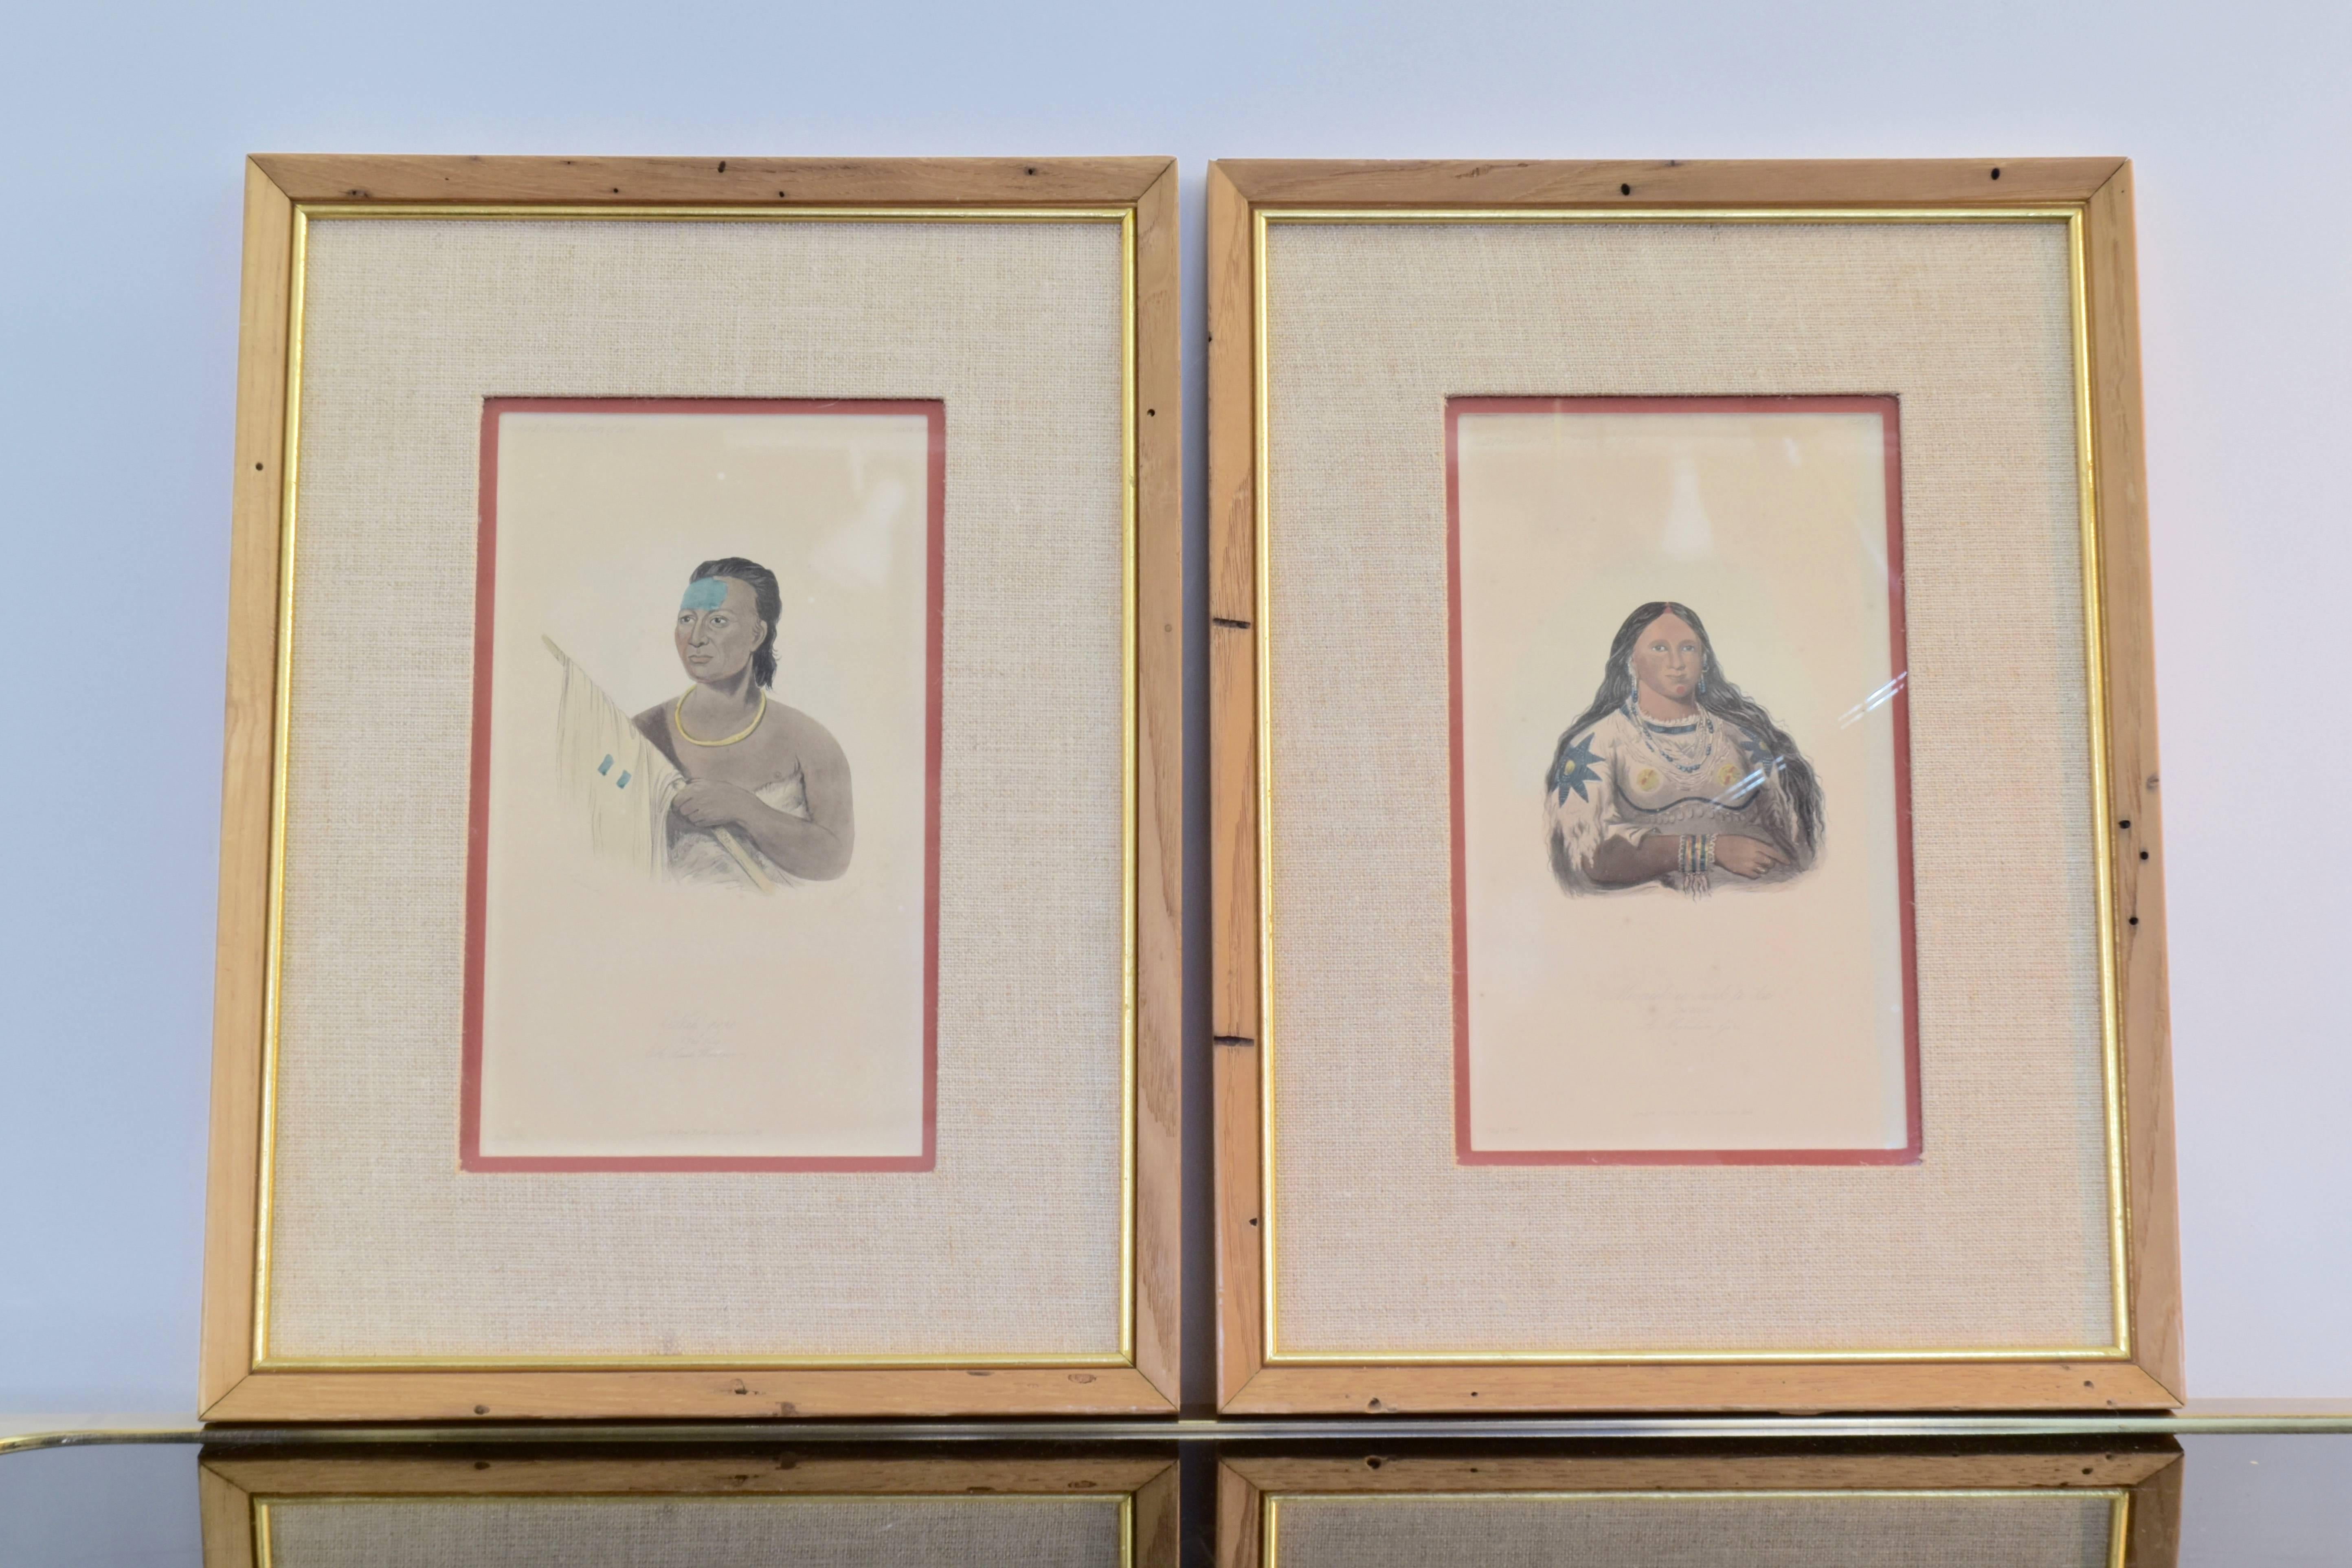 A handsome collection of George Catlin Indian hand-colored prints from 1855 in vintage frames with pine and giltwood and linen mats. 

George Catlin was the first artist to record the Plains Indians in their own territories. He admired them as the